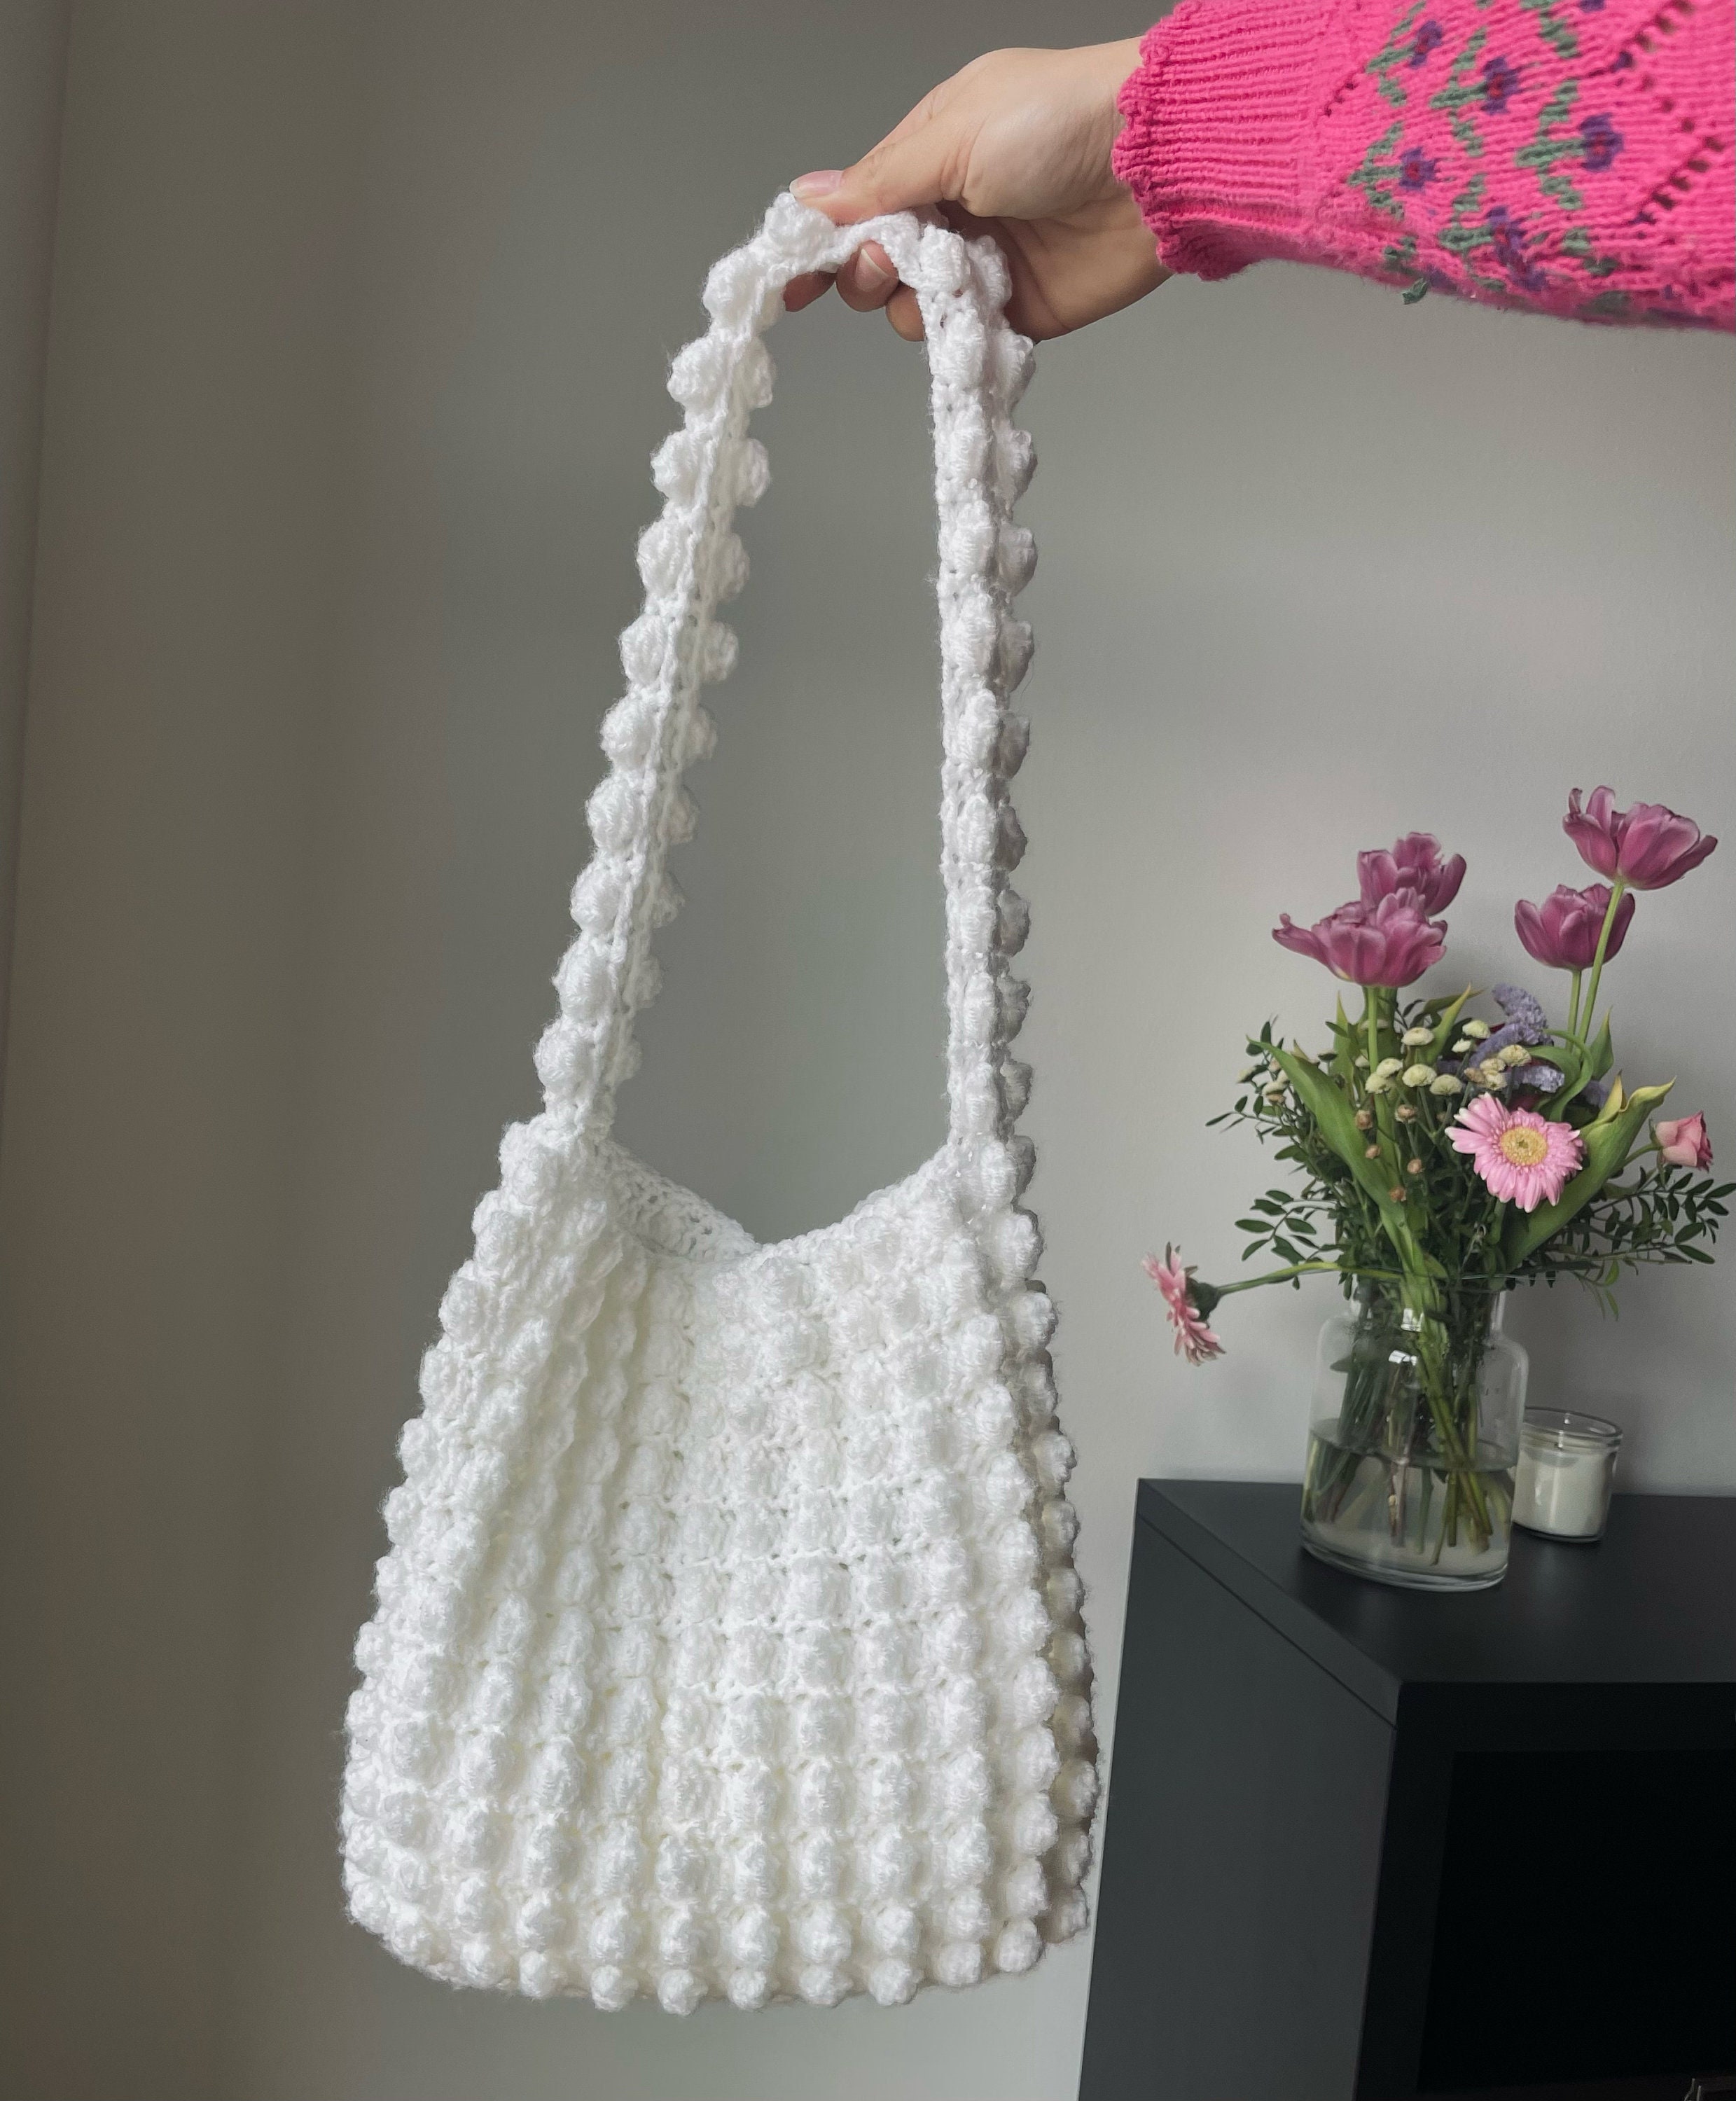 How to Crochet a Bag Easily (with Pictures) - wikiHow